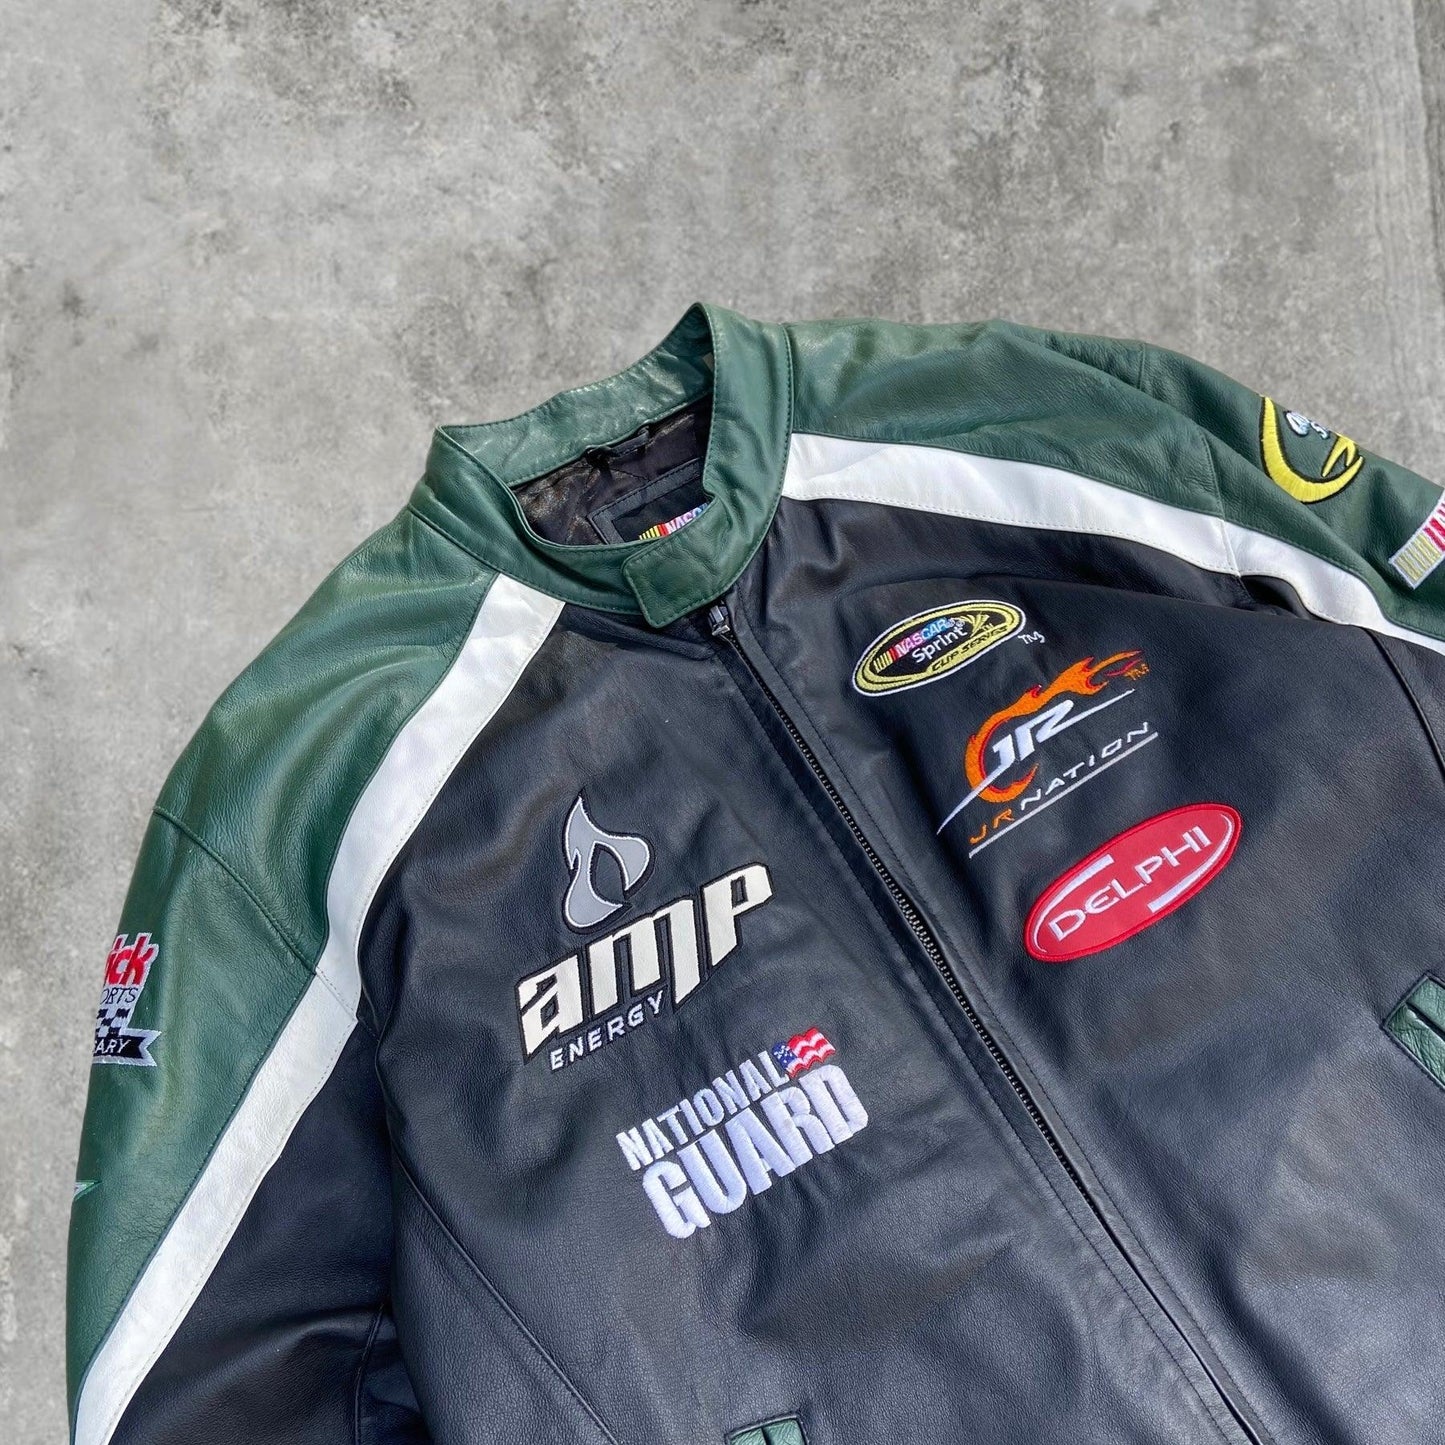 NASCAR RACER LEATHER JACKET - XL - Known Source